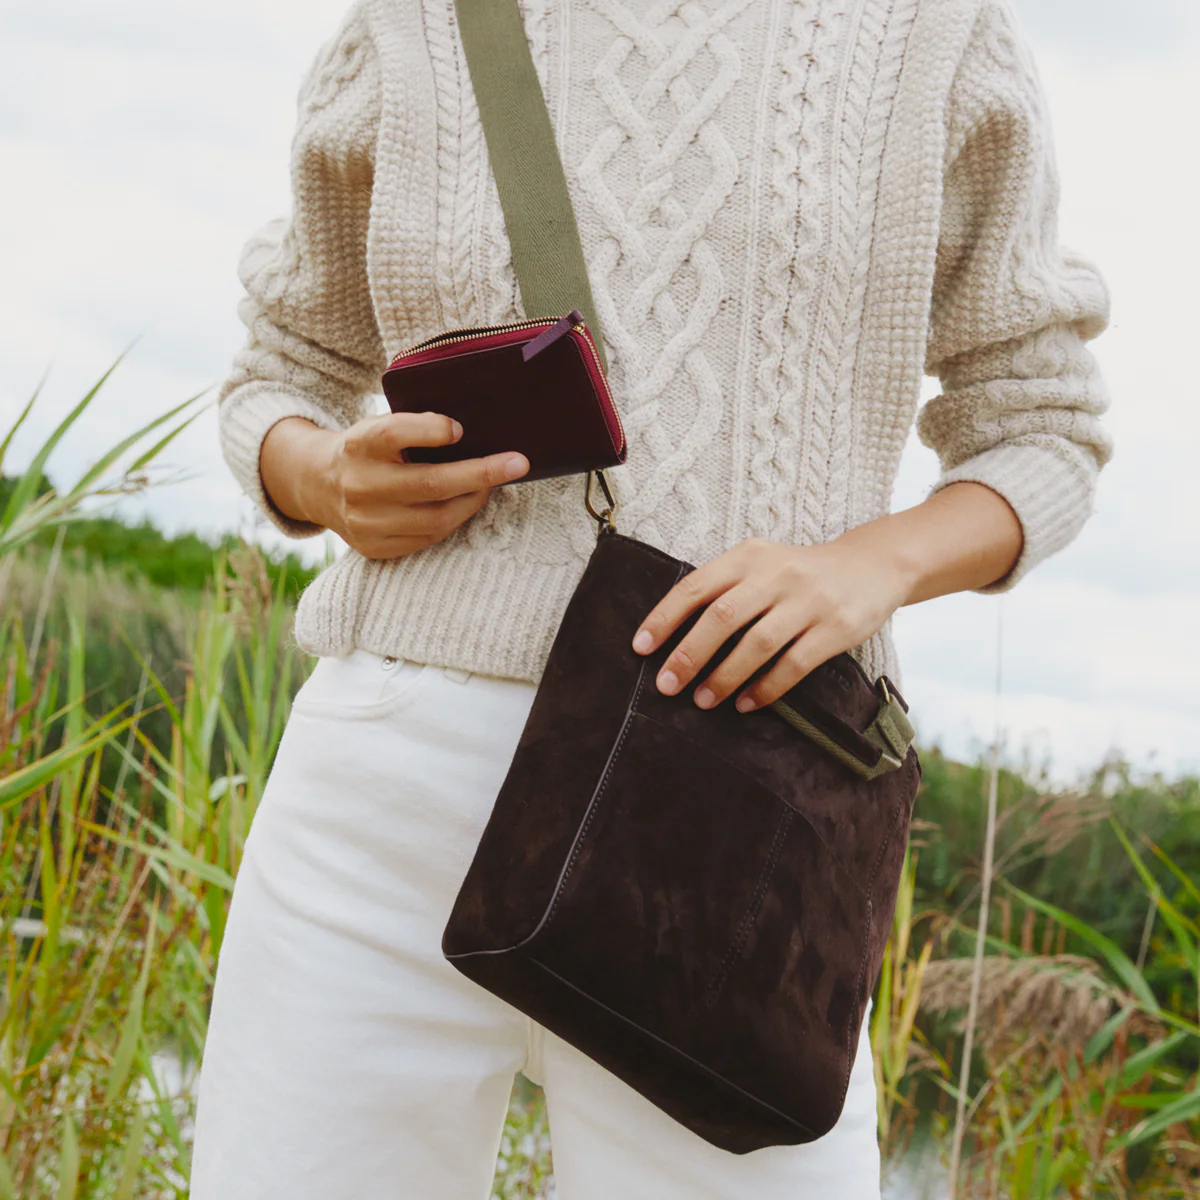 Suede / Burgundy | woman holding wallet and bucket bag